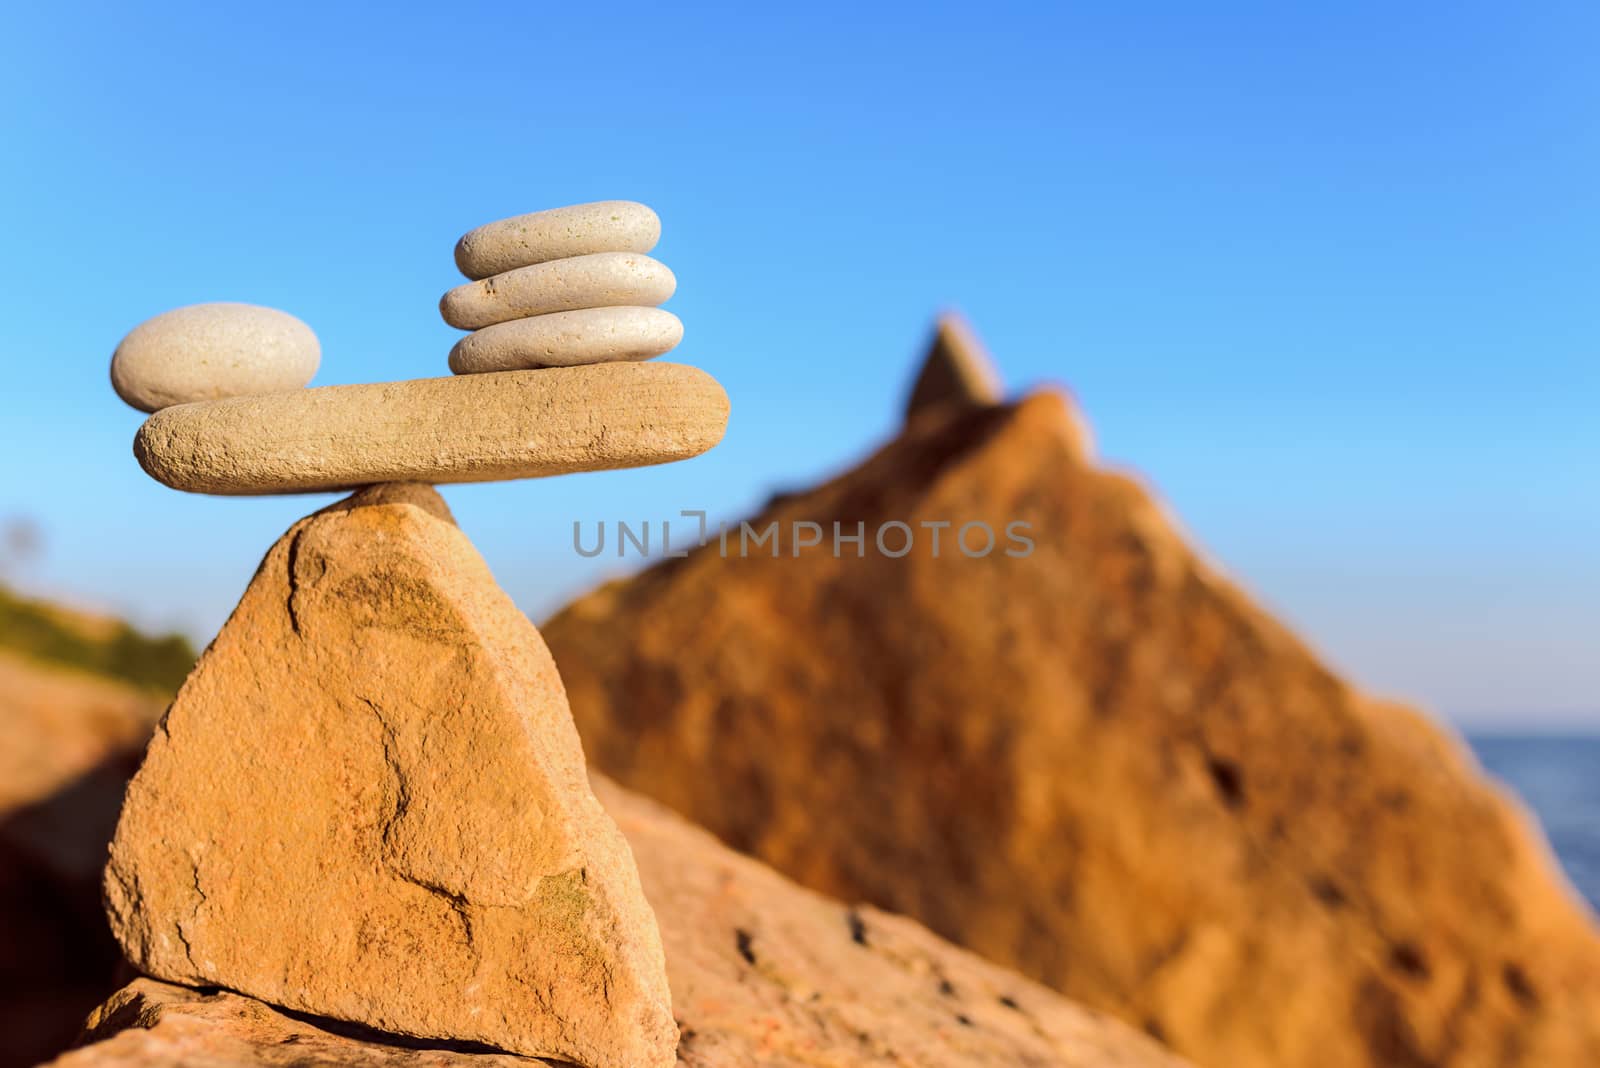 Balanced stack of pebbles by styf22